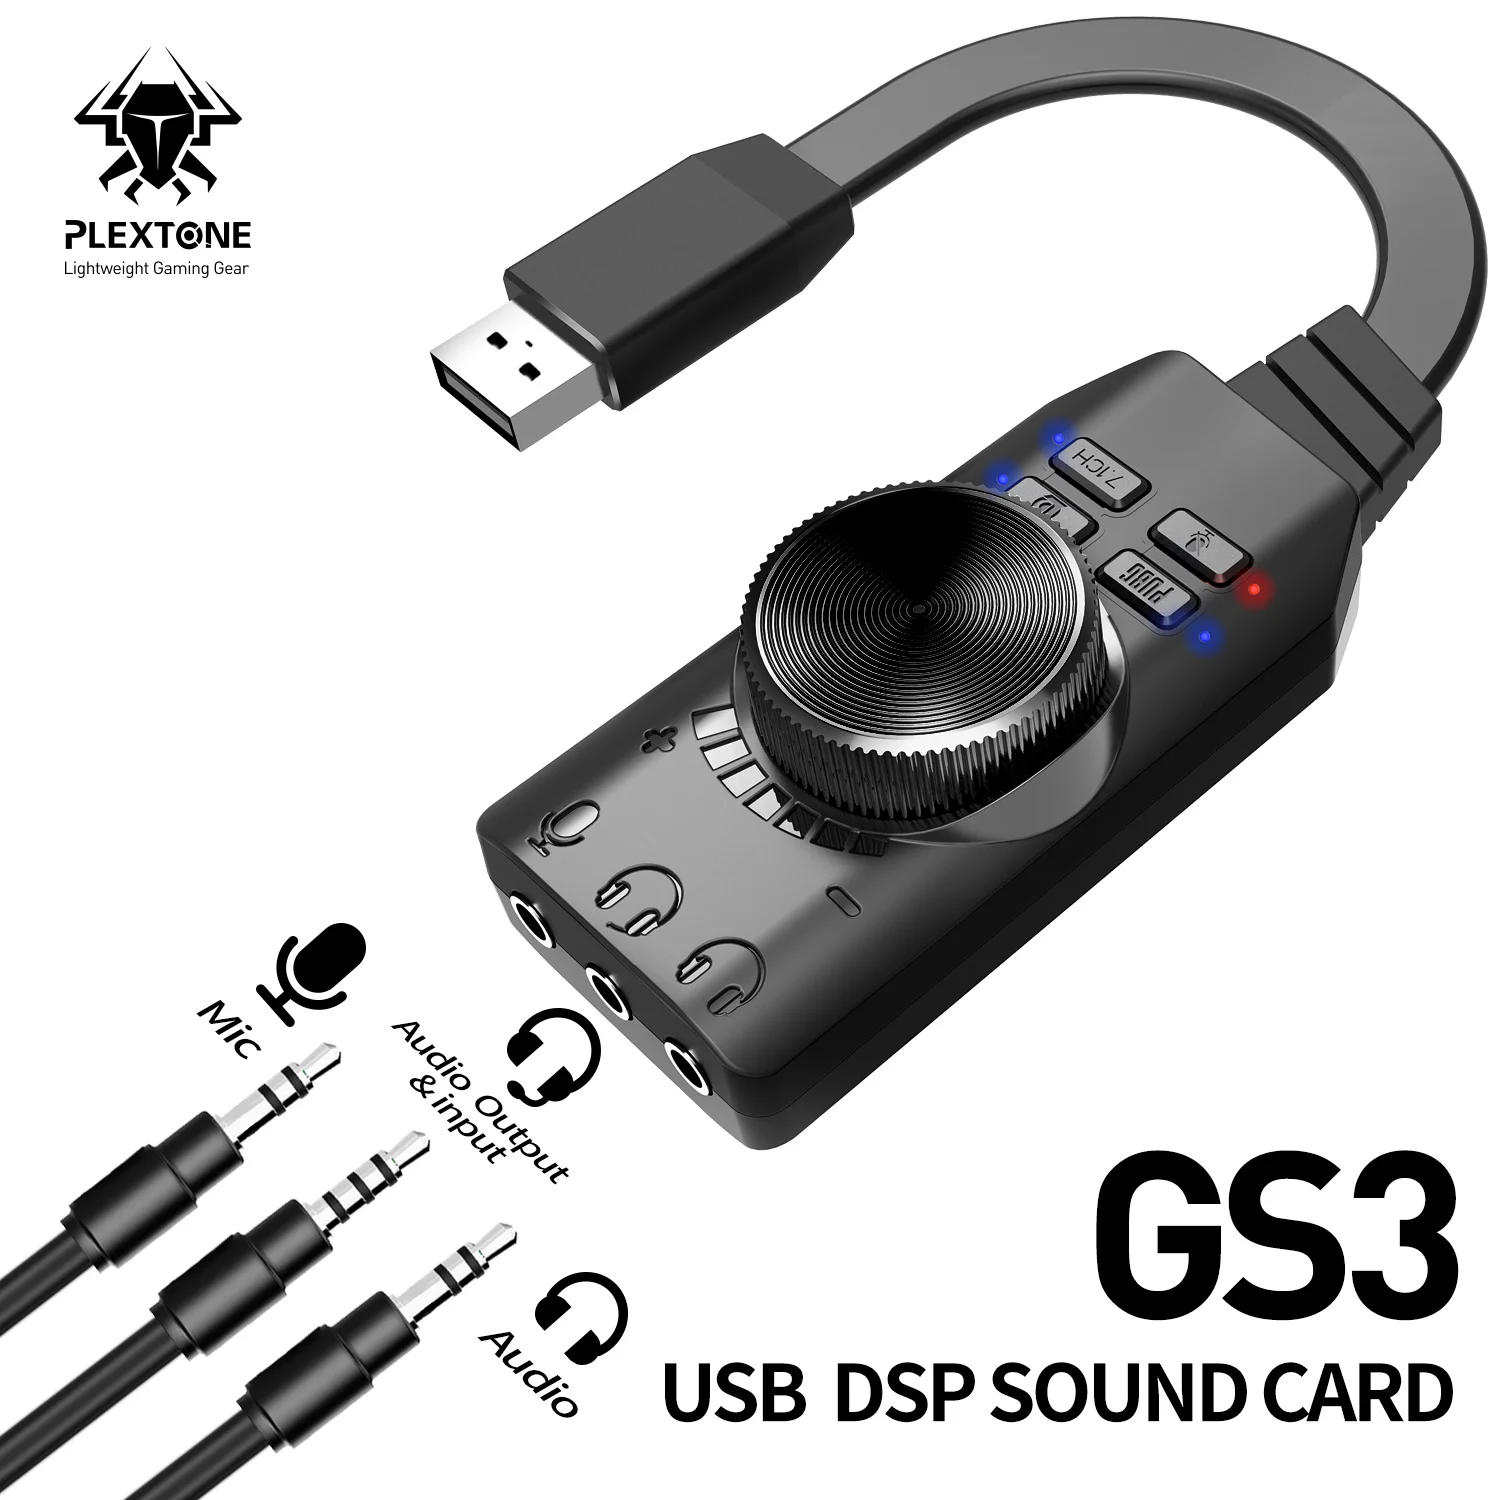 Wholesale Gaming Sound Card USB Audio Interface 3.5mm Microphone Adapter Soundcard for Laptop PS4 Headset USB Sound Card From m.alibaba.com